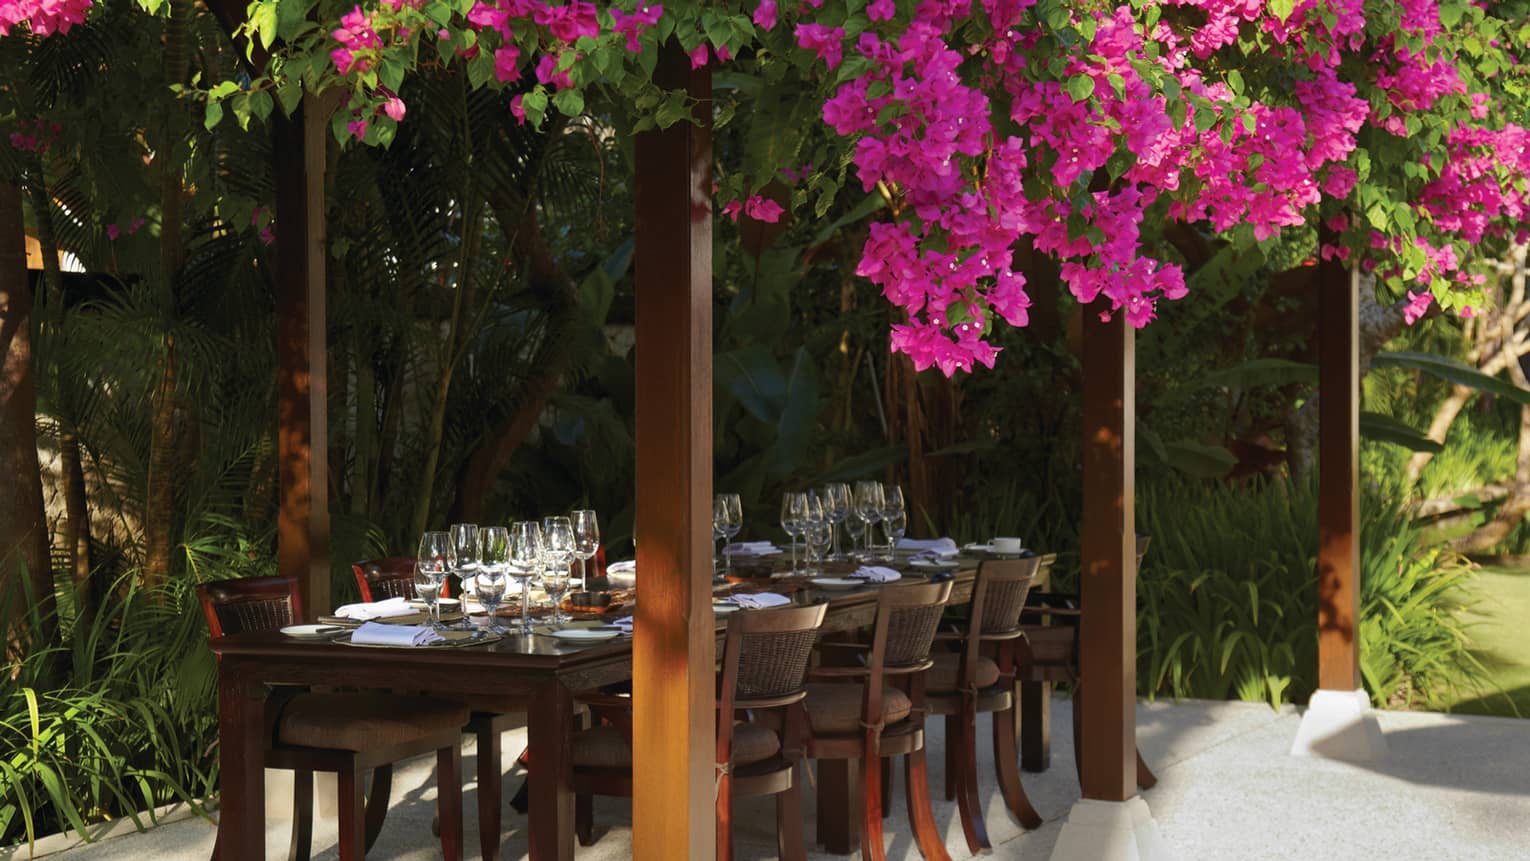 Purple flowers draped over pergola and large outdoor dining table